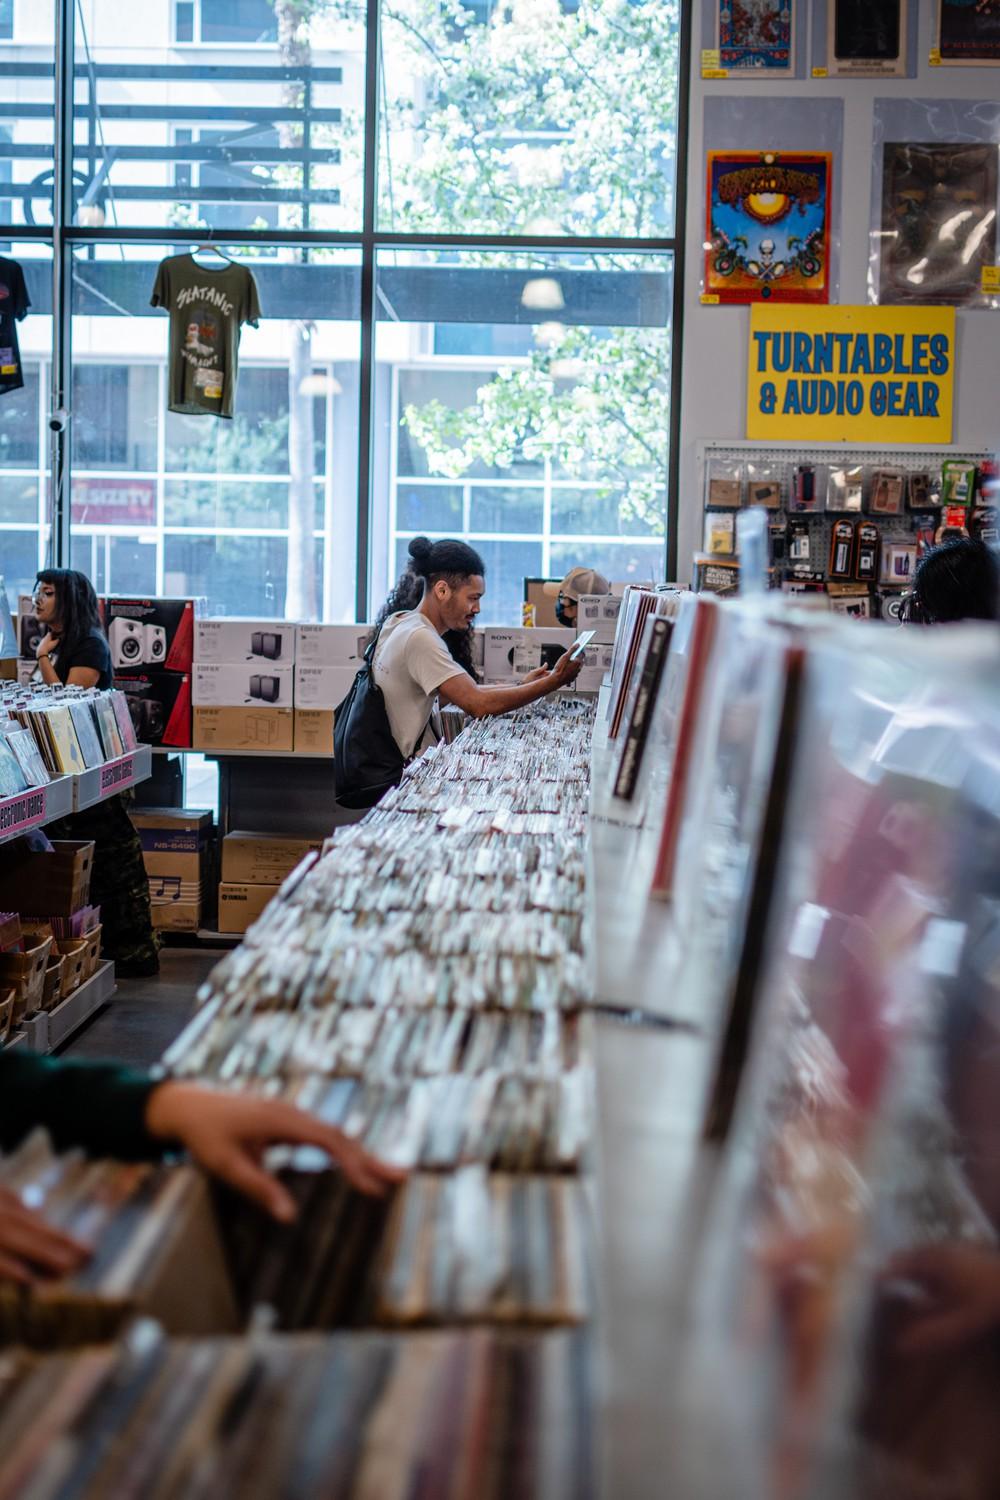 Customers at Amobea search for records.